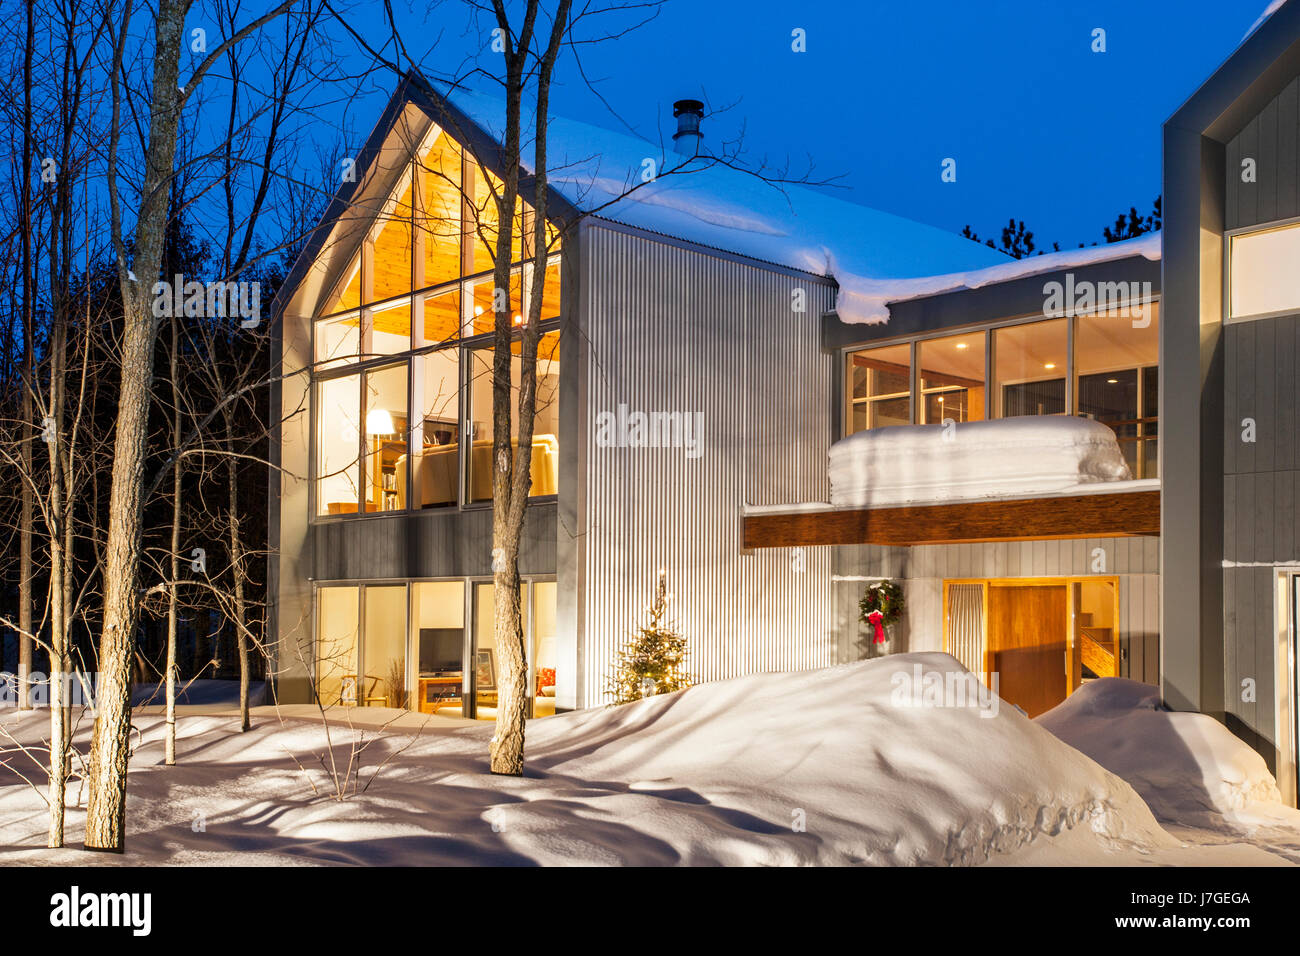 North America, Canada, Ontario, modern steel and wood house Stock Photo